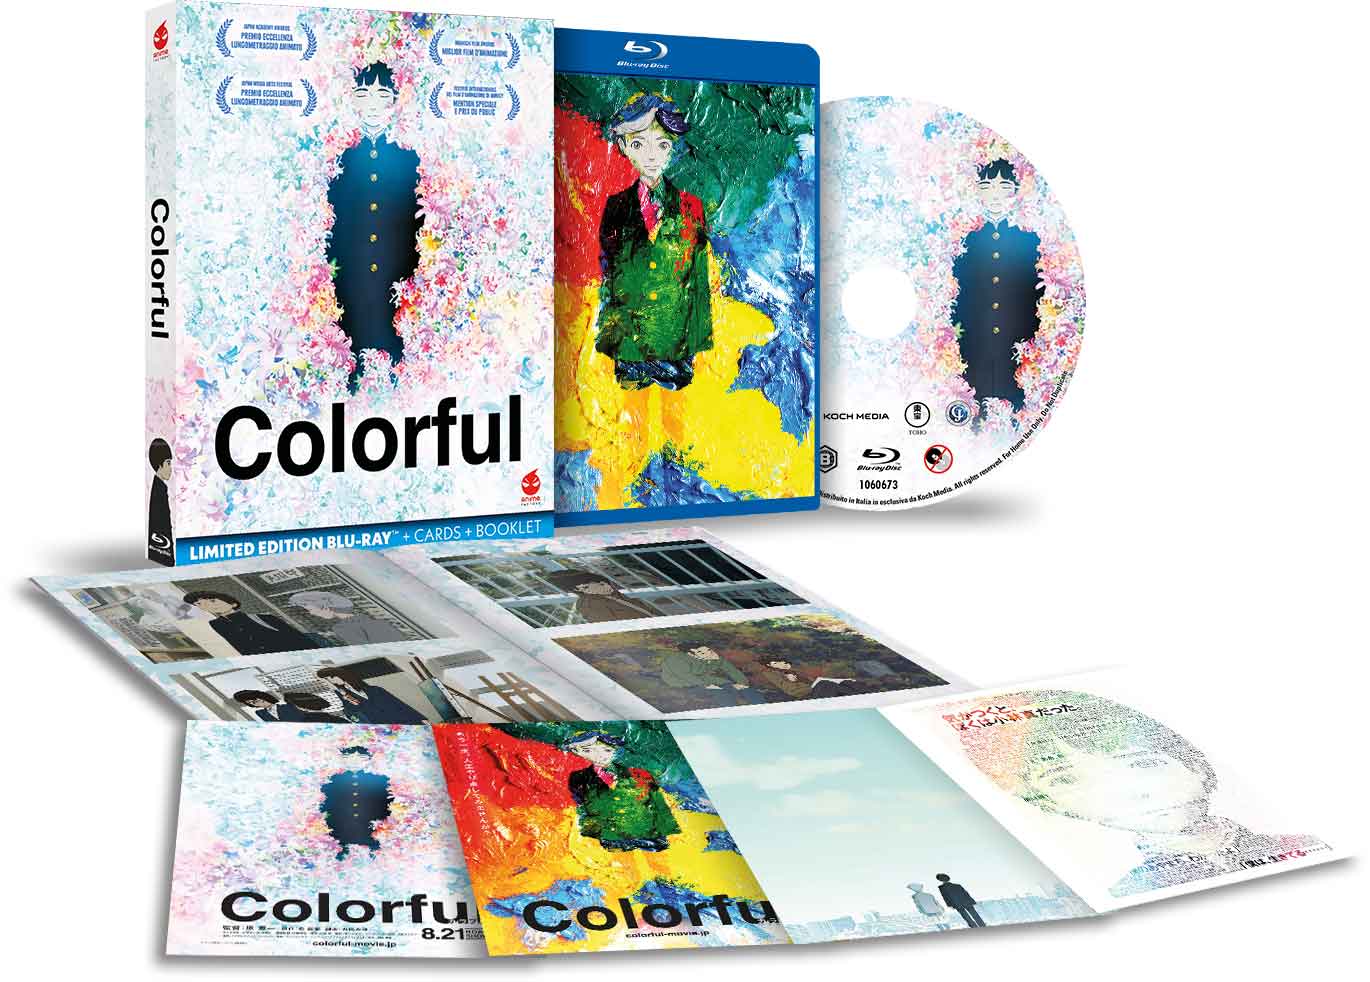 Colorful - Limited Edition Blu-ray + Cards + Booklet (Blu-ray) Image 2